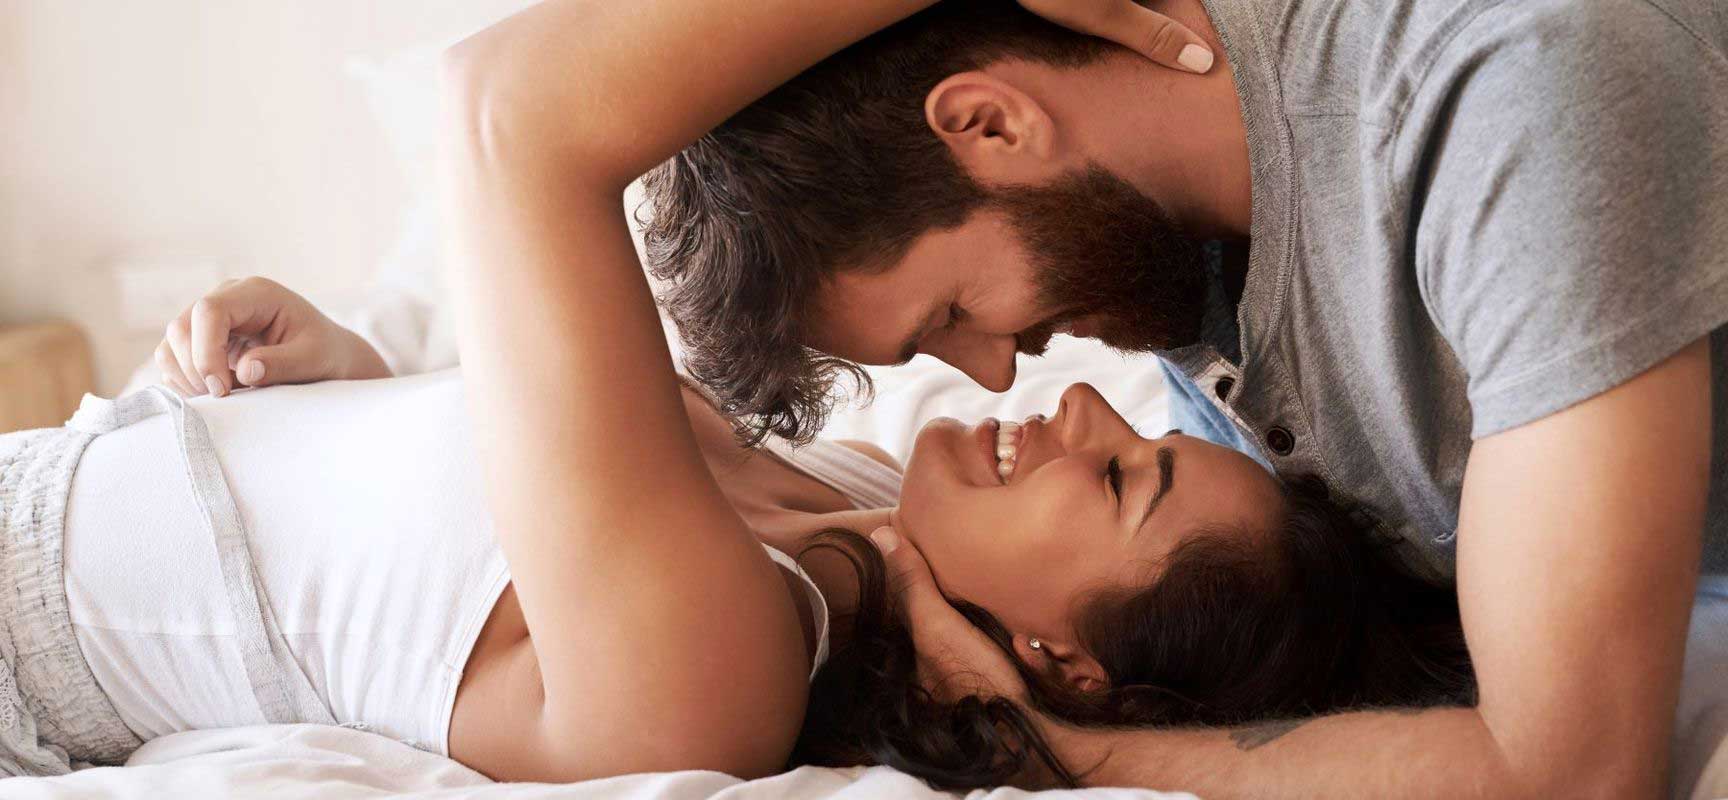 Curiosity 101: How Foreplay Changes Everything